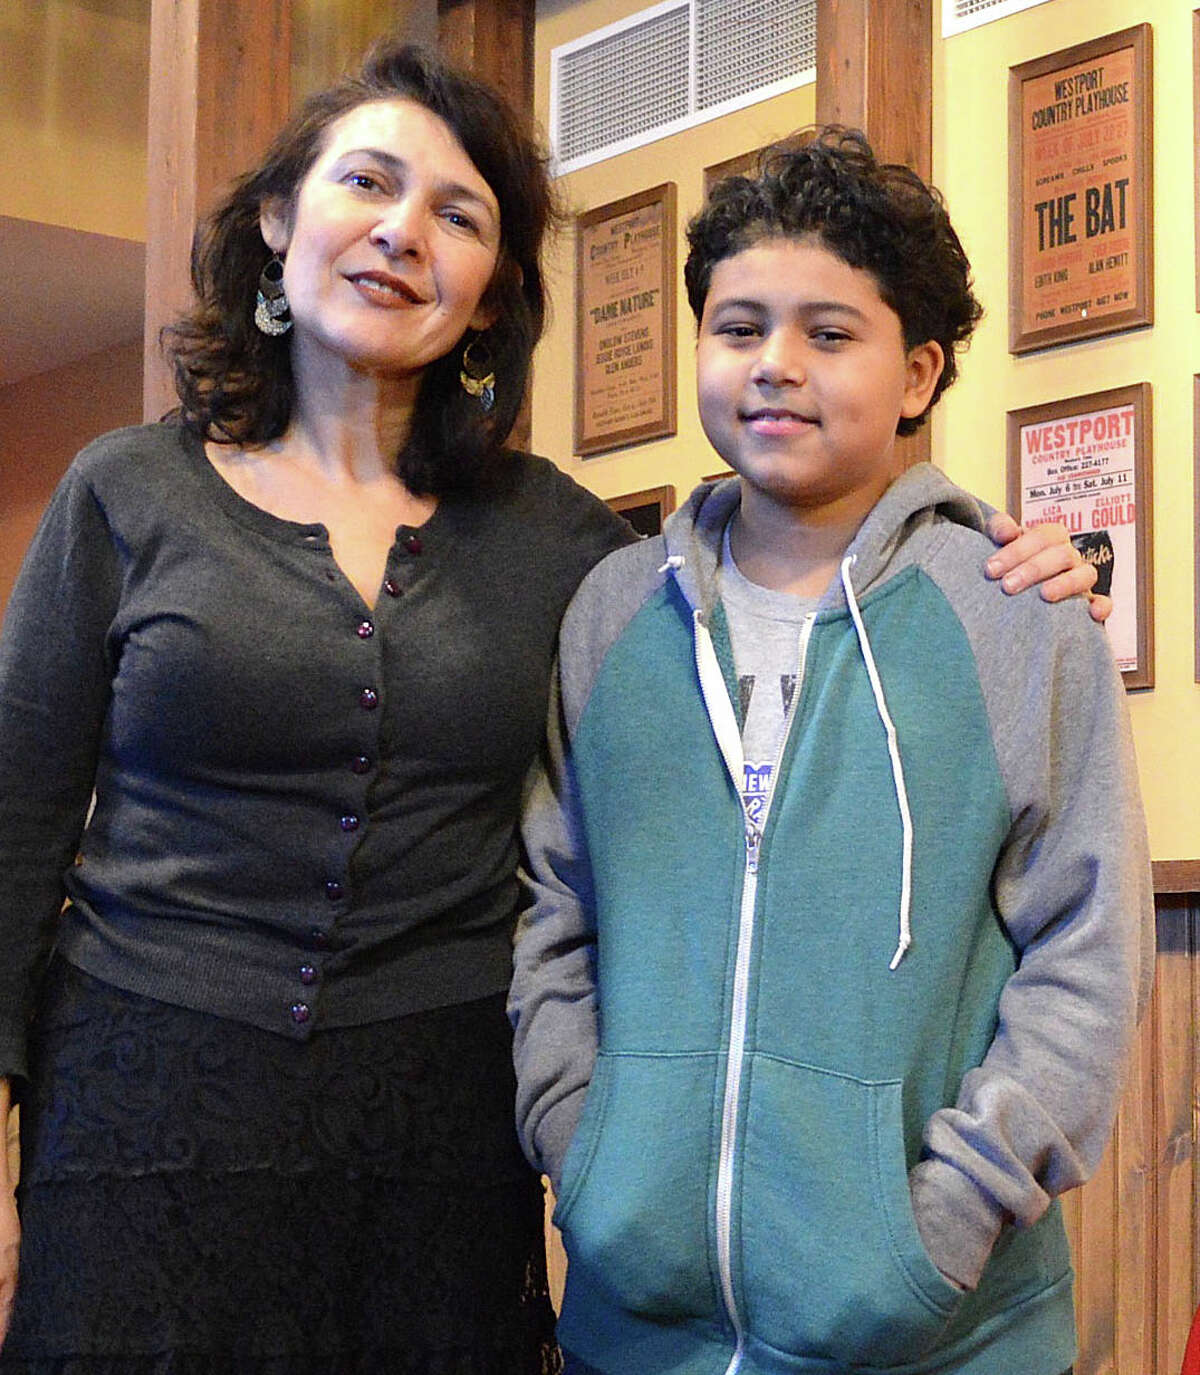 Rayhan Pasternak of Fairfield, left, was accompanied to the WestportREADS program by grandson Leon, 9, because like speaker/writer James McBride, they have mixed-race backgrounds.